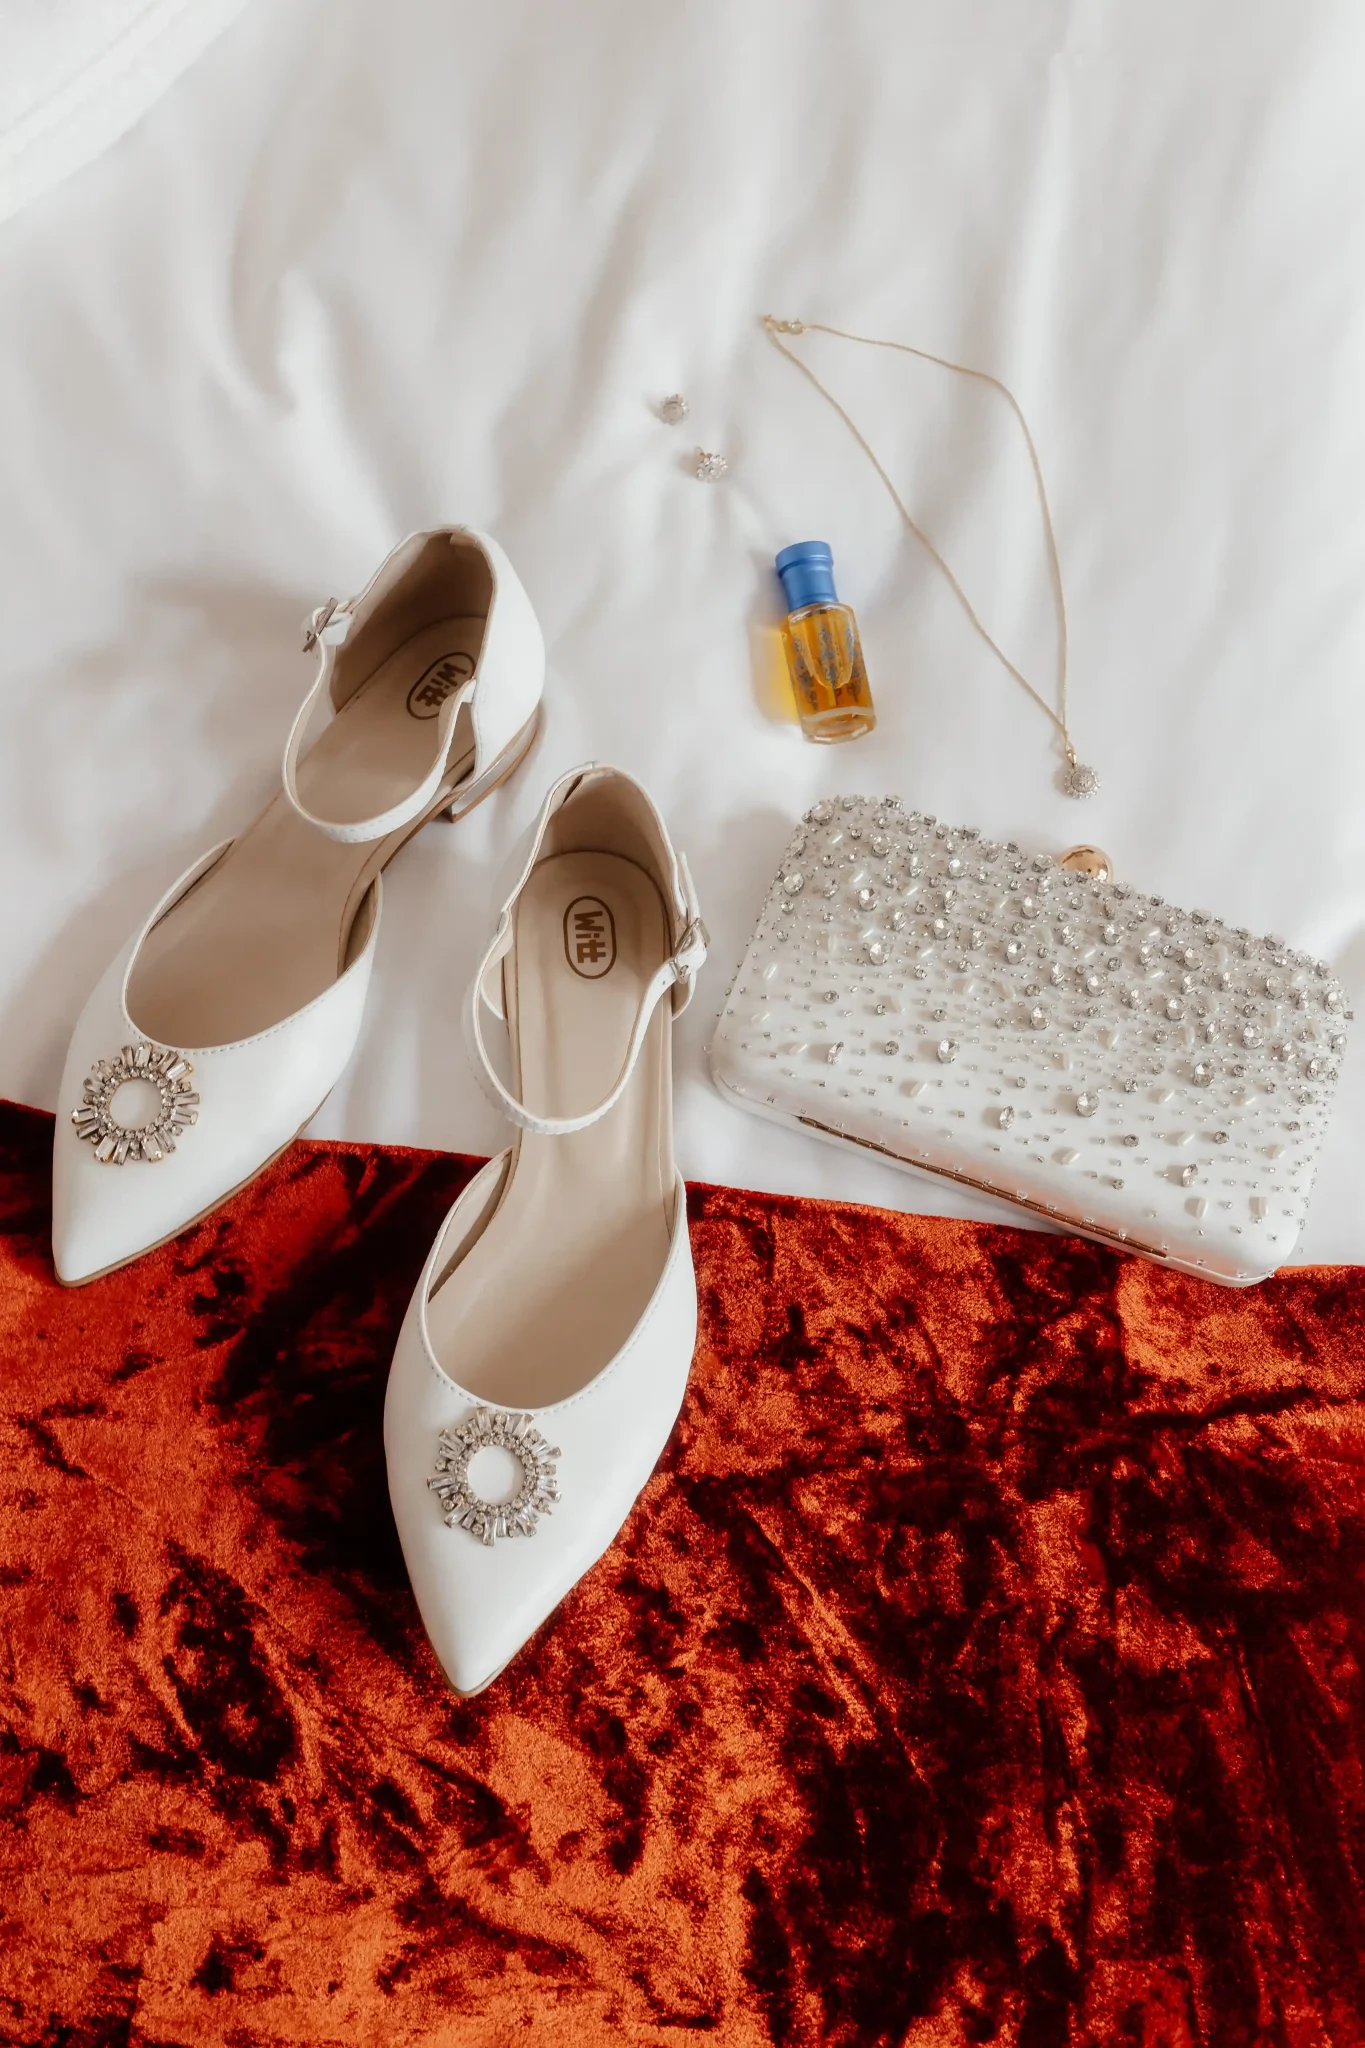 A white pair of shoes and a clutch on a bed.